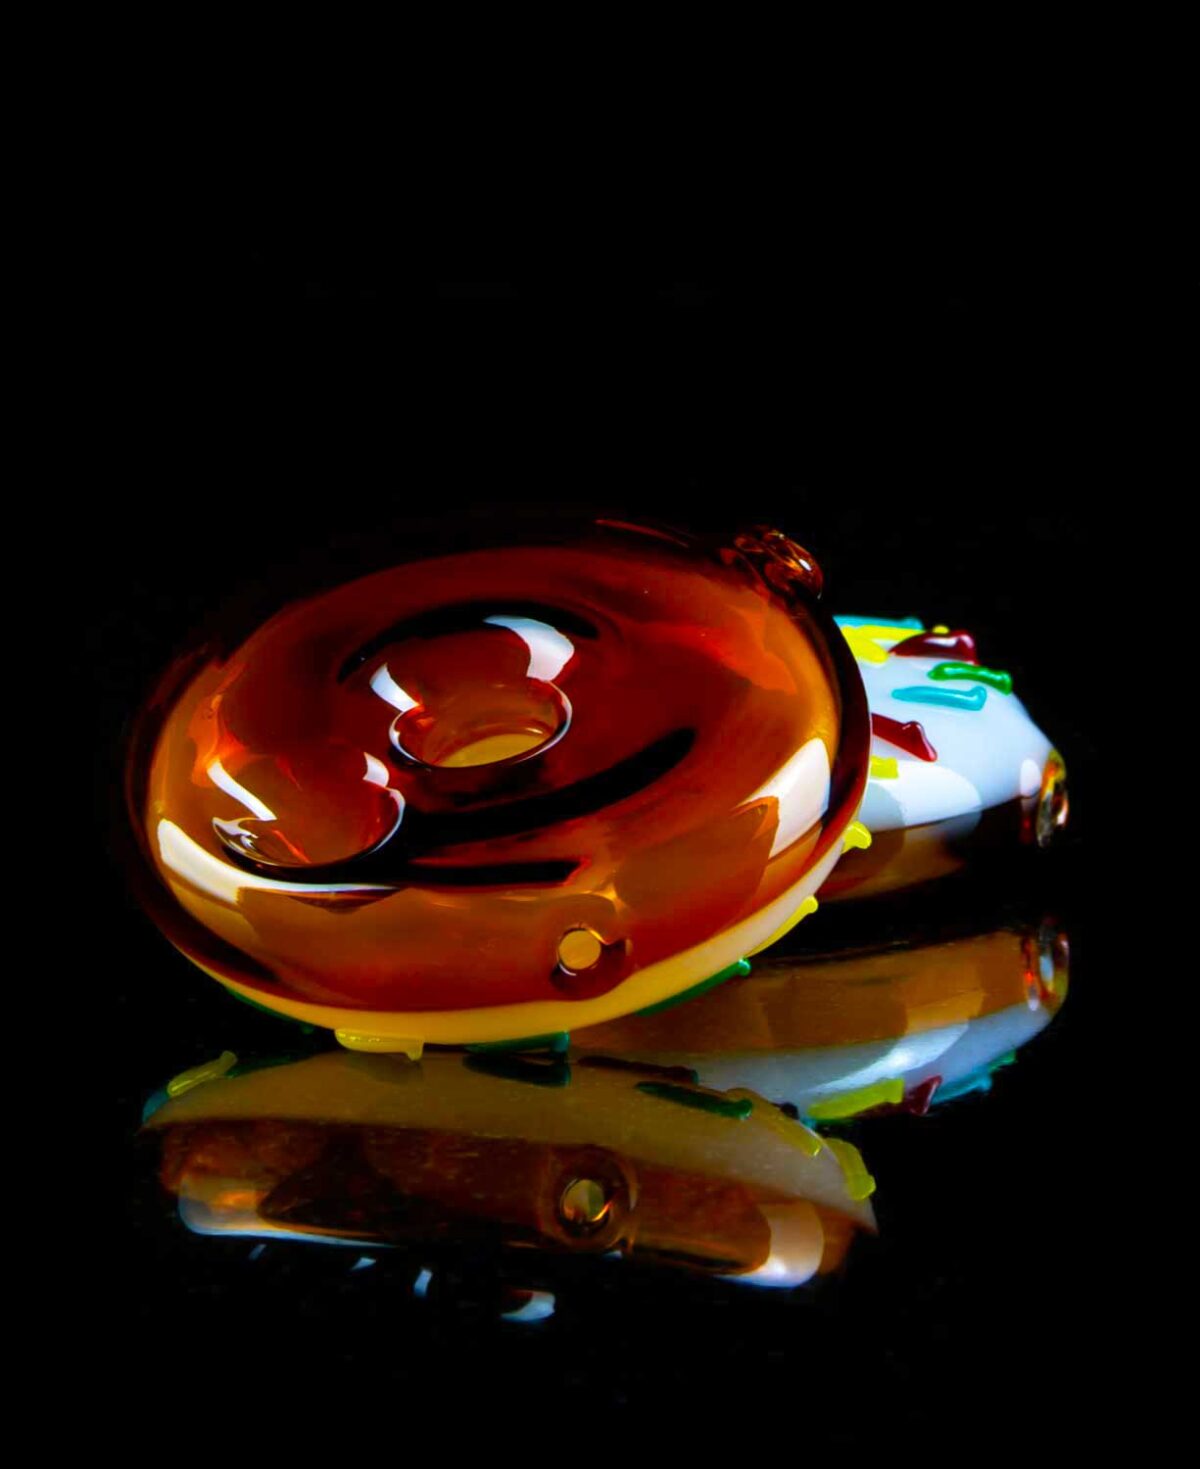 donut shaped pipe made from borosilicate glass